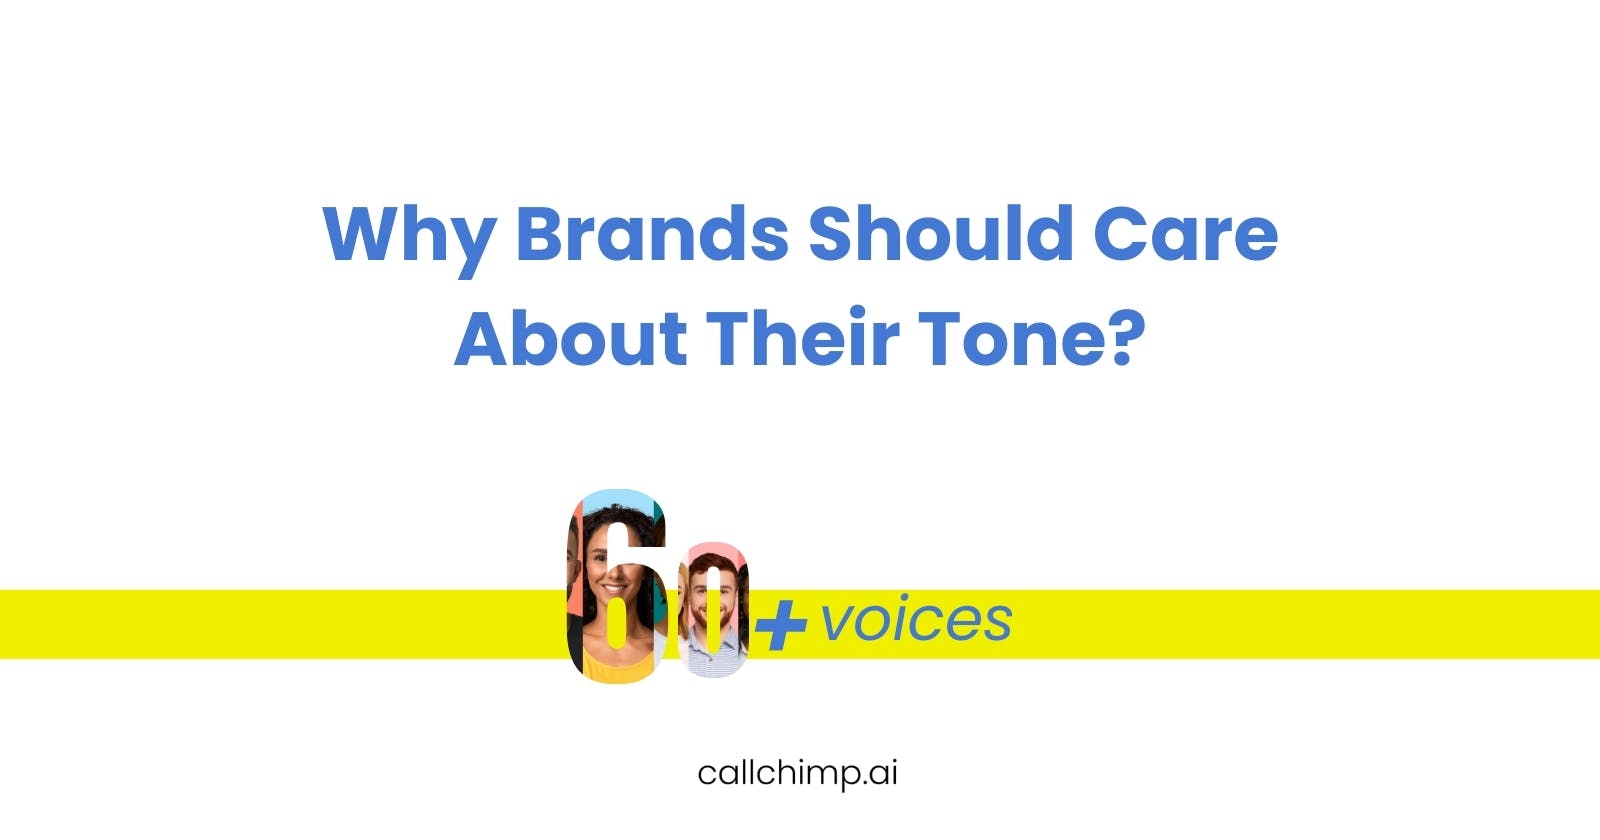 The Power of Voice: Why Brands Should Care About Their Tone